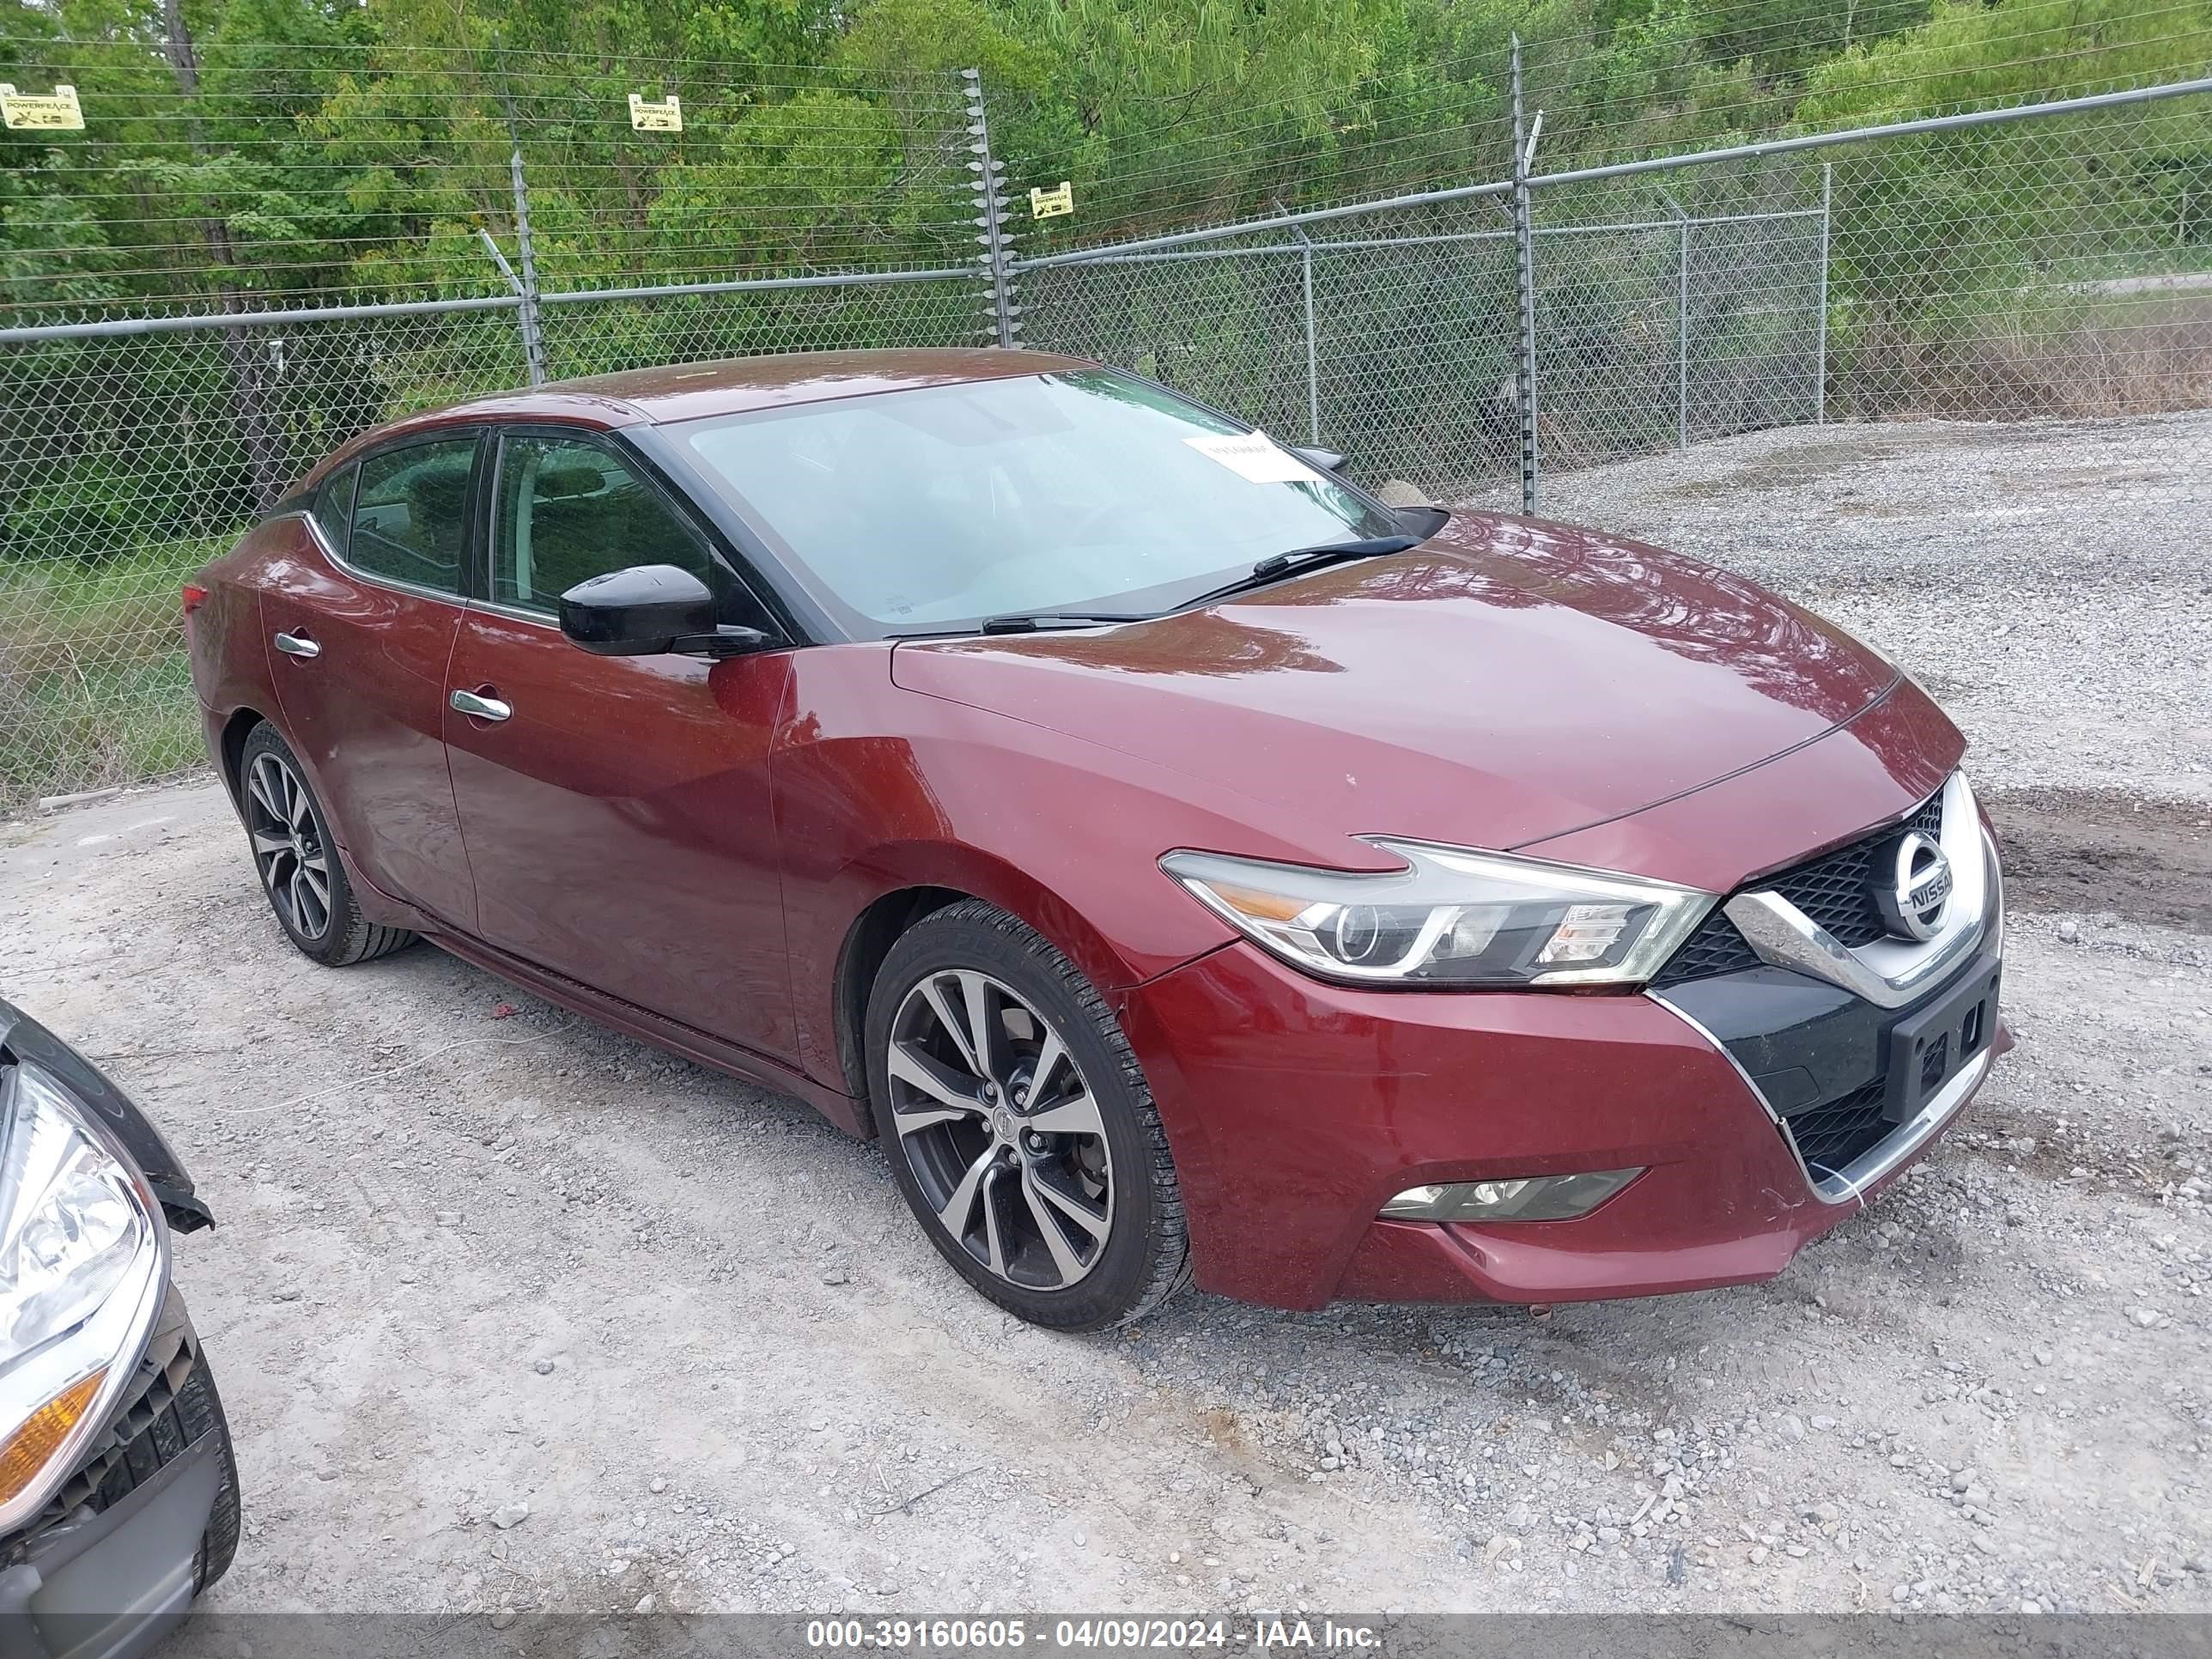 vin: 1N4AA6AP0GC379225 1N4AA6AP0GC379225 2016 nissan maxima 3500 for Sale in 39562, 8209 Old Stage Rd, Moss Point, Mississippi, USA